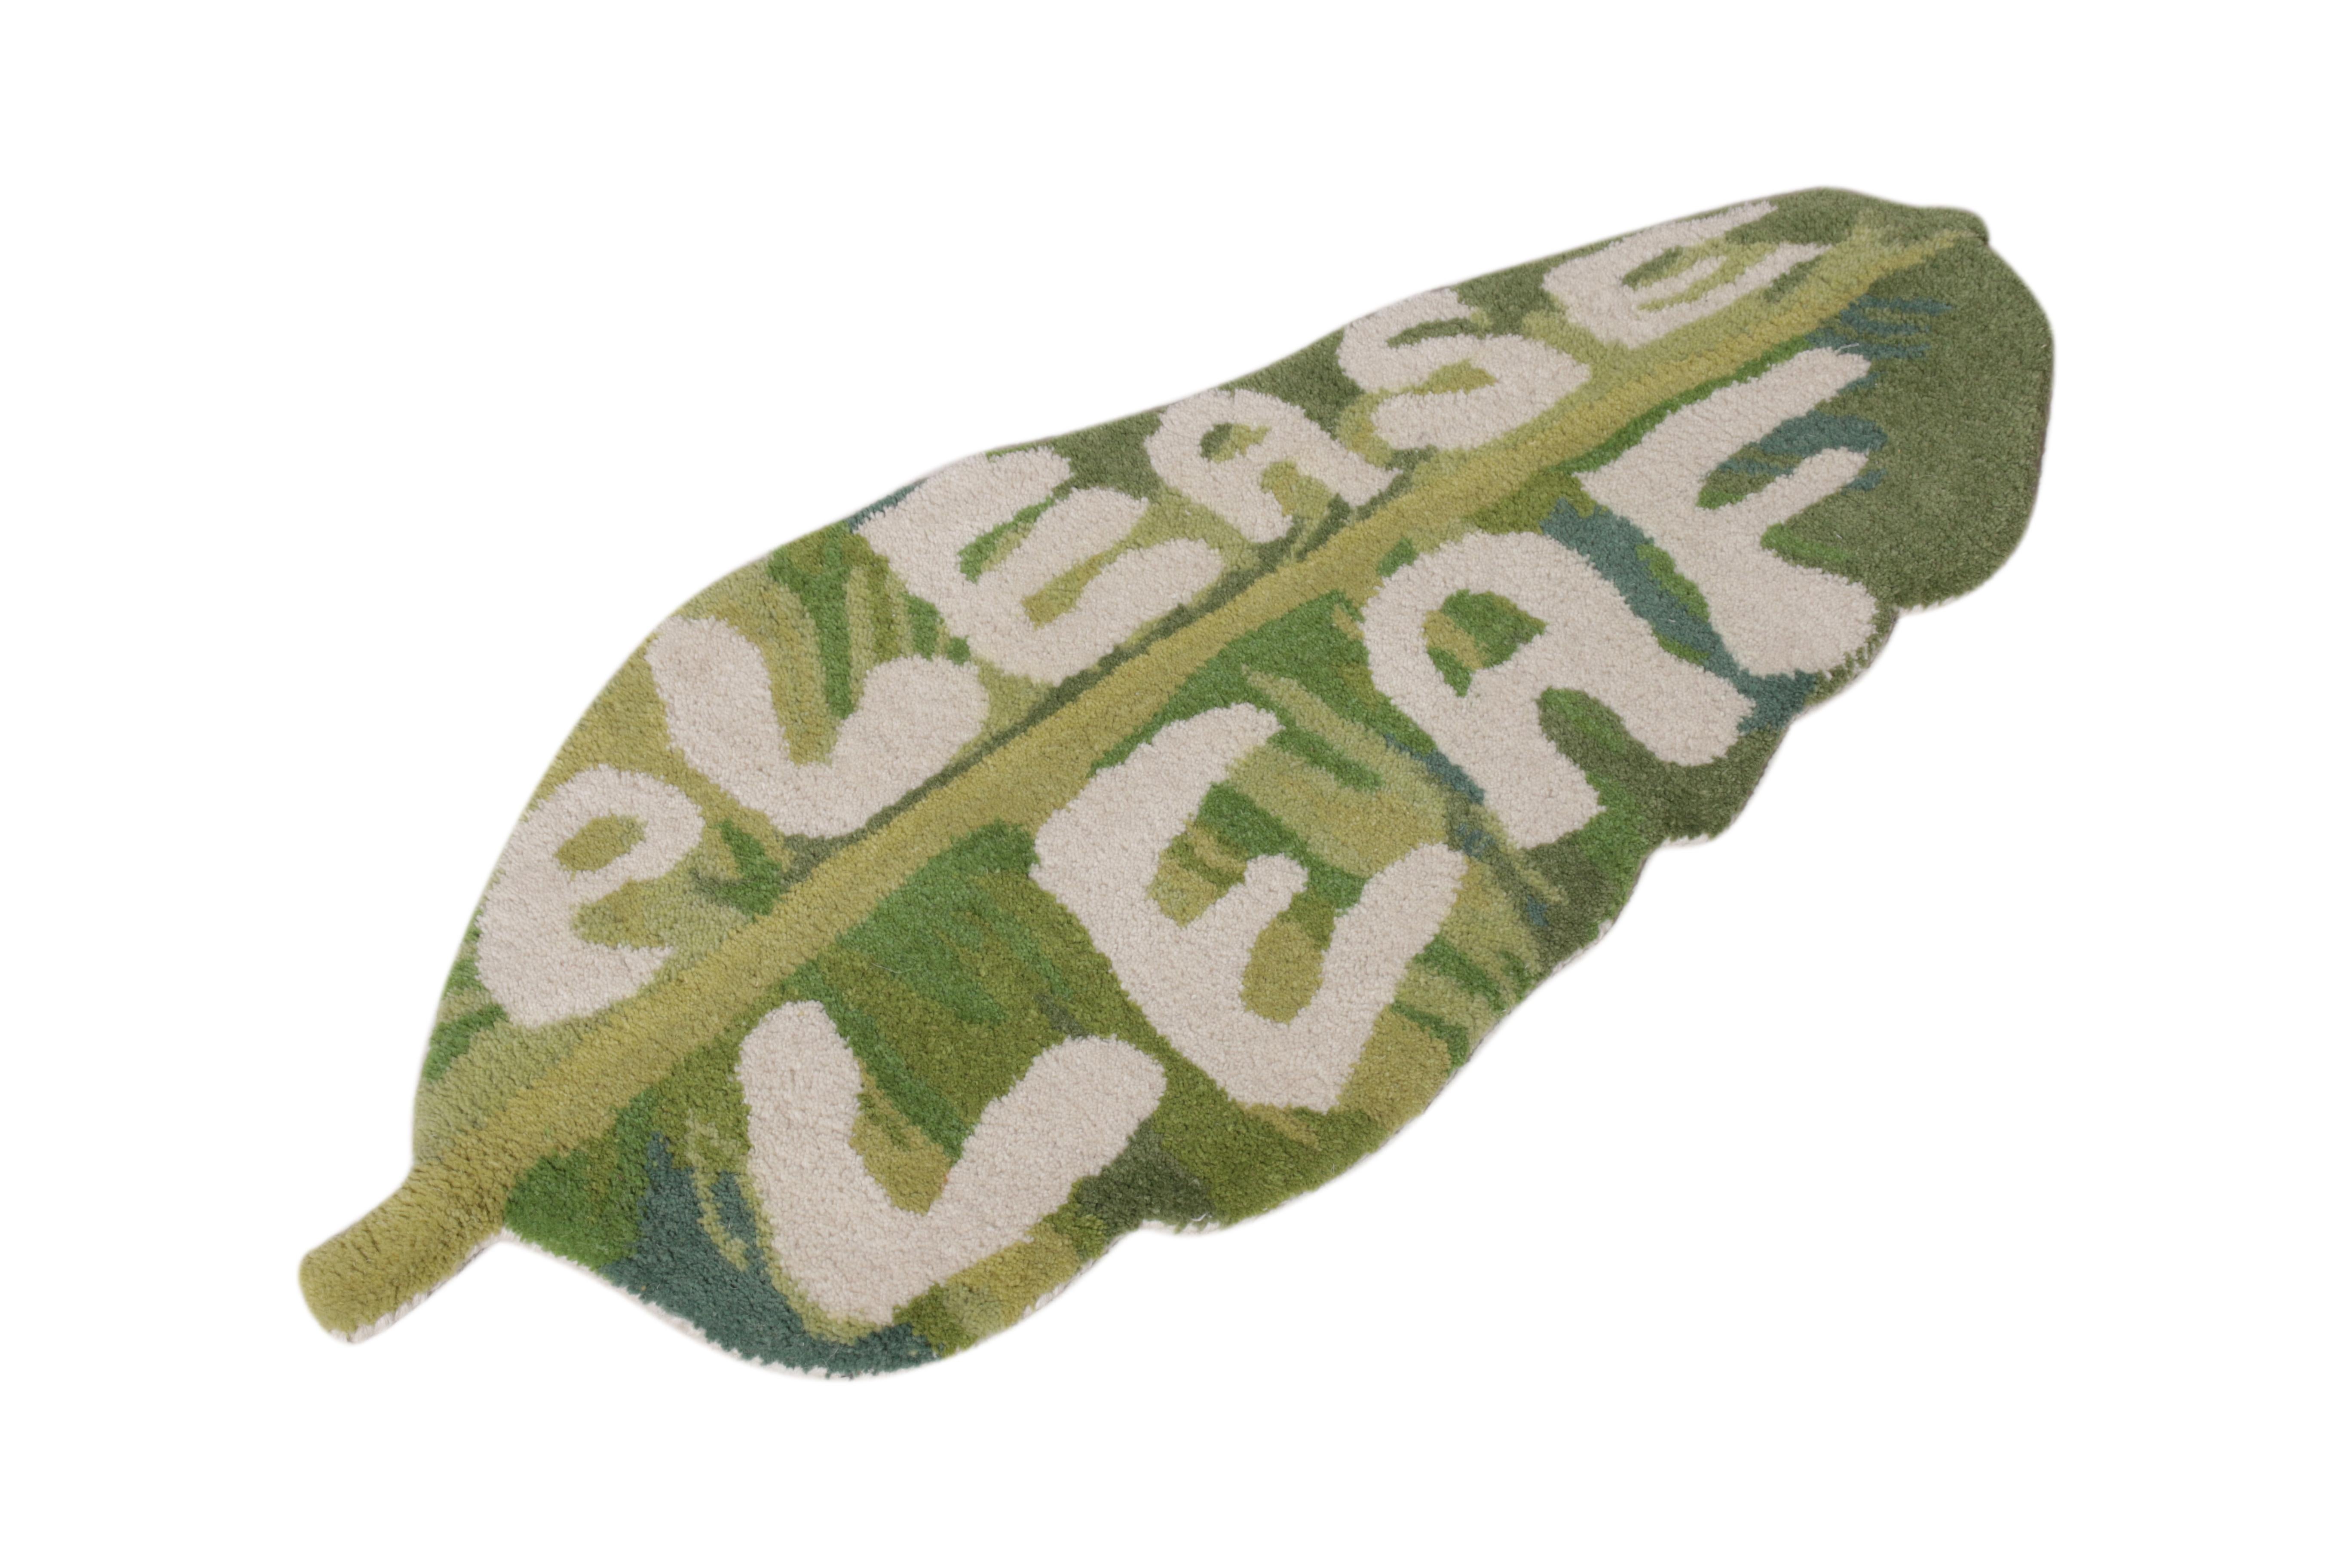 A hand-knotted 1x3 wool rug from Rug & Kilim’s New & Modern Collection. Enjoying high-low text reading “Please Leaf” in playful typography with green and white hues. Ideal as a doormat and accent piece in approachable projects, further sporting a